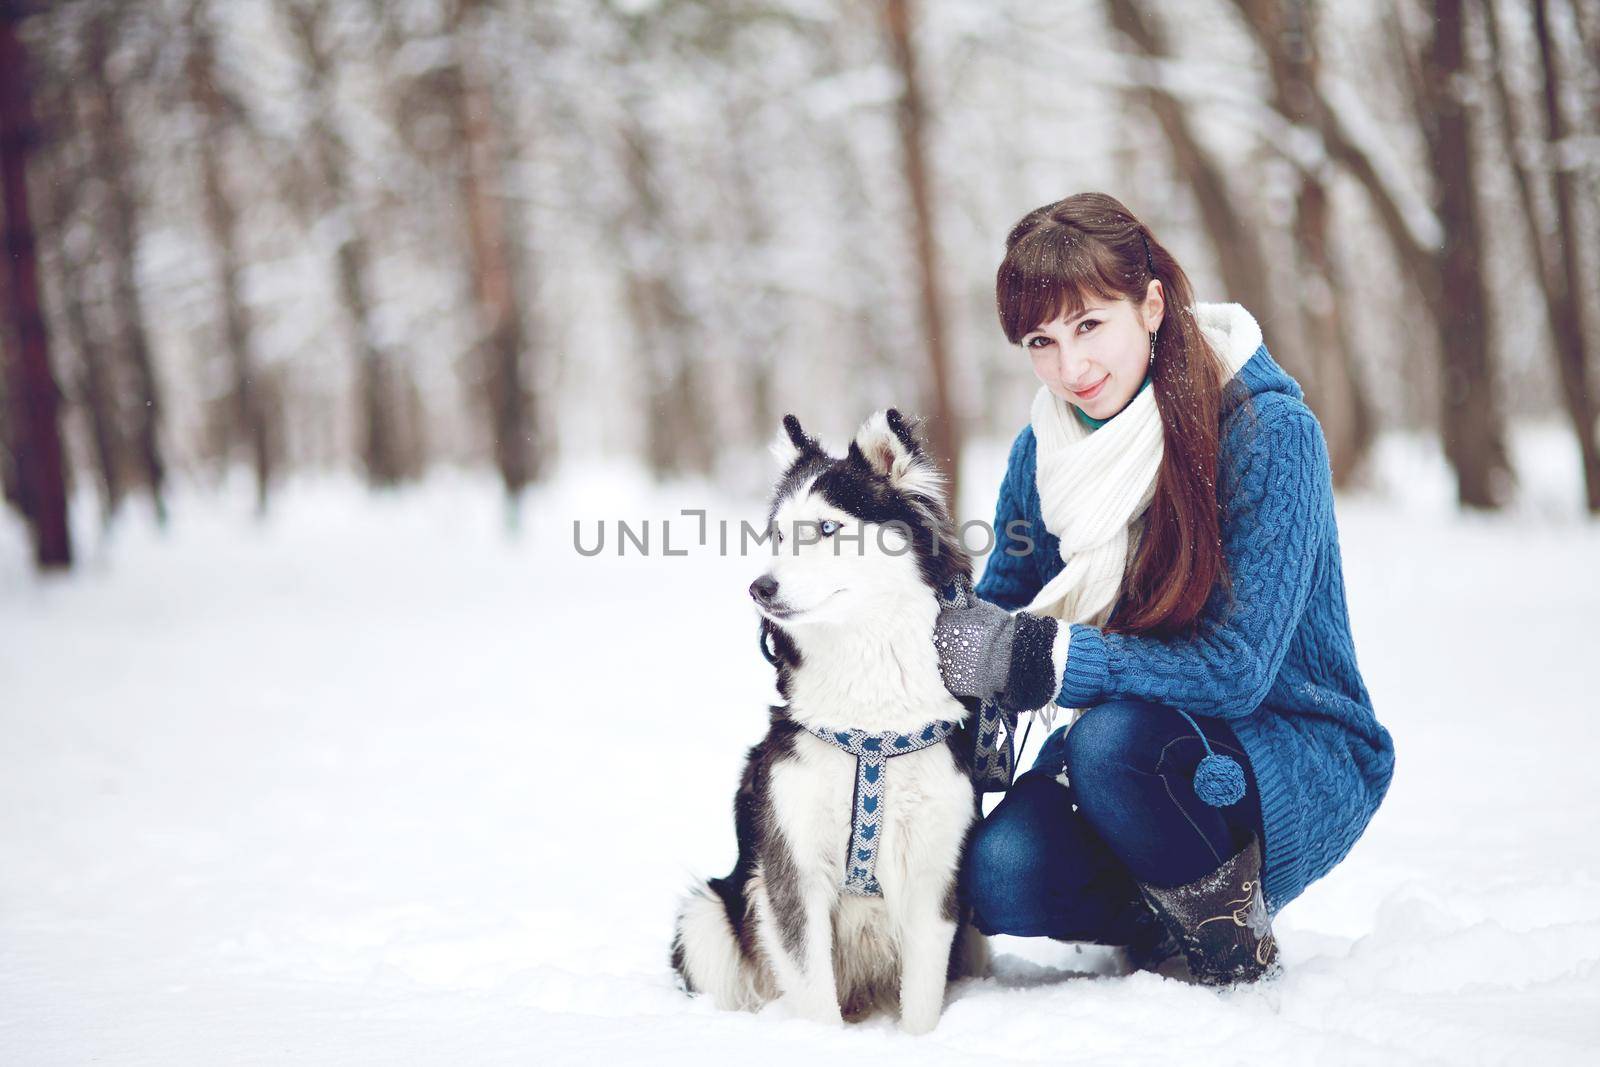 Girl sitting in the snow with a siberian husky dog in the winter forest by selinsmo